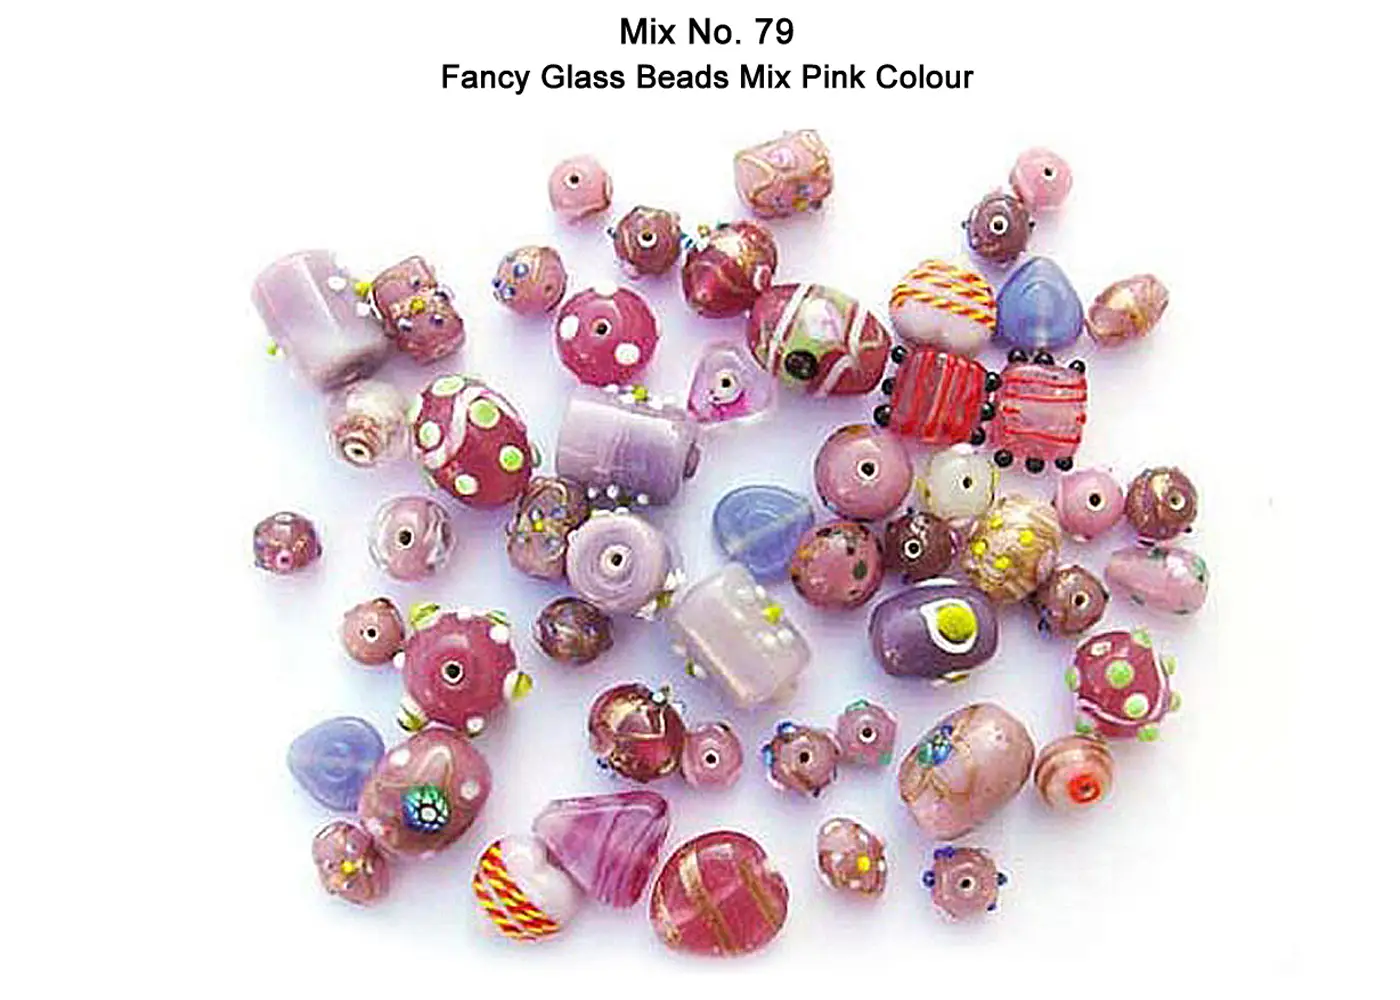 Fancy Glass Beads in Pink color